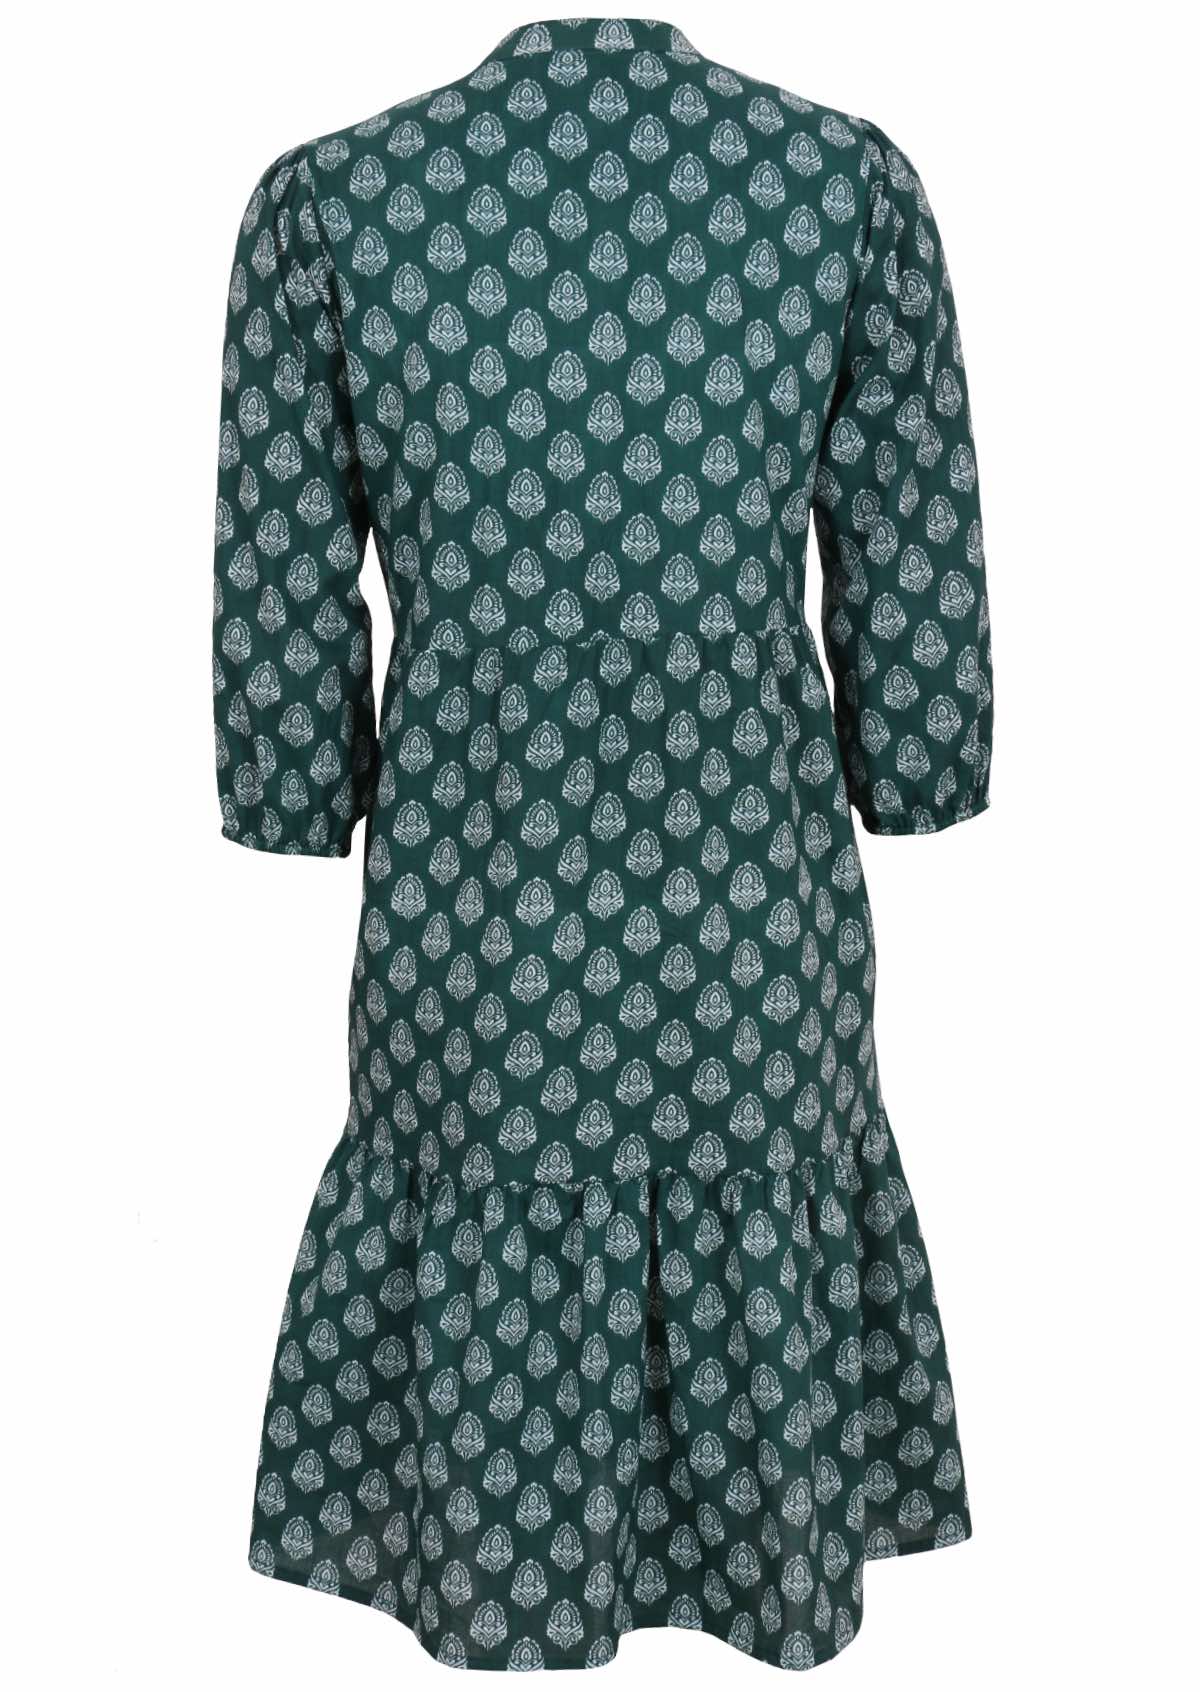 Lightweight cotton midi dress with tiered skirt and 3/4 sleeves